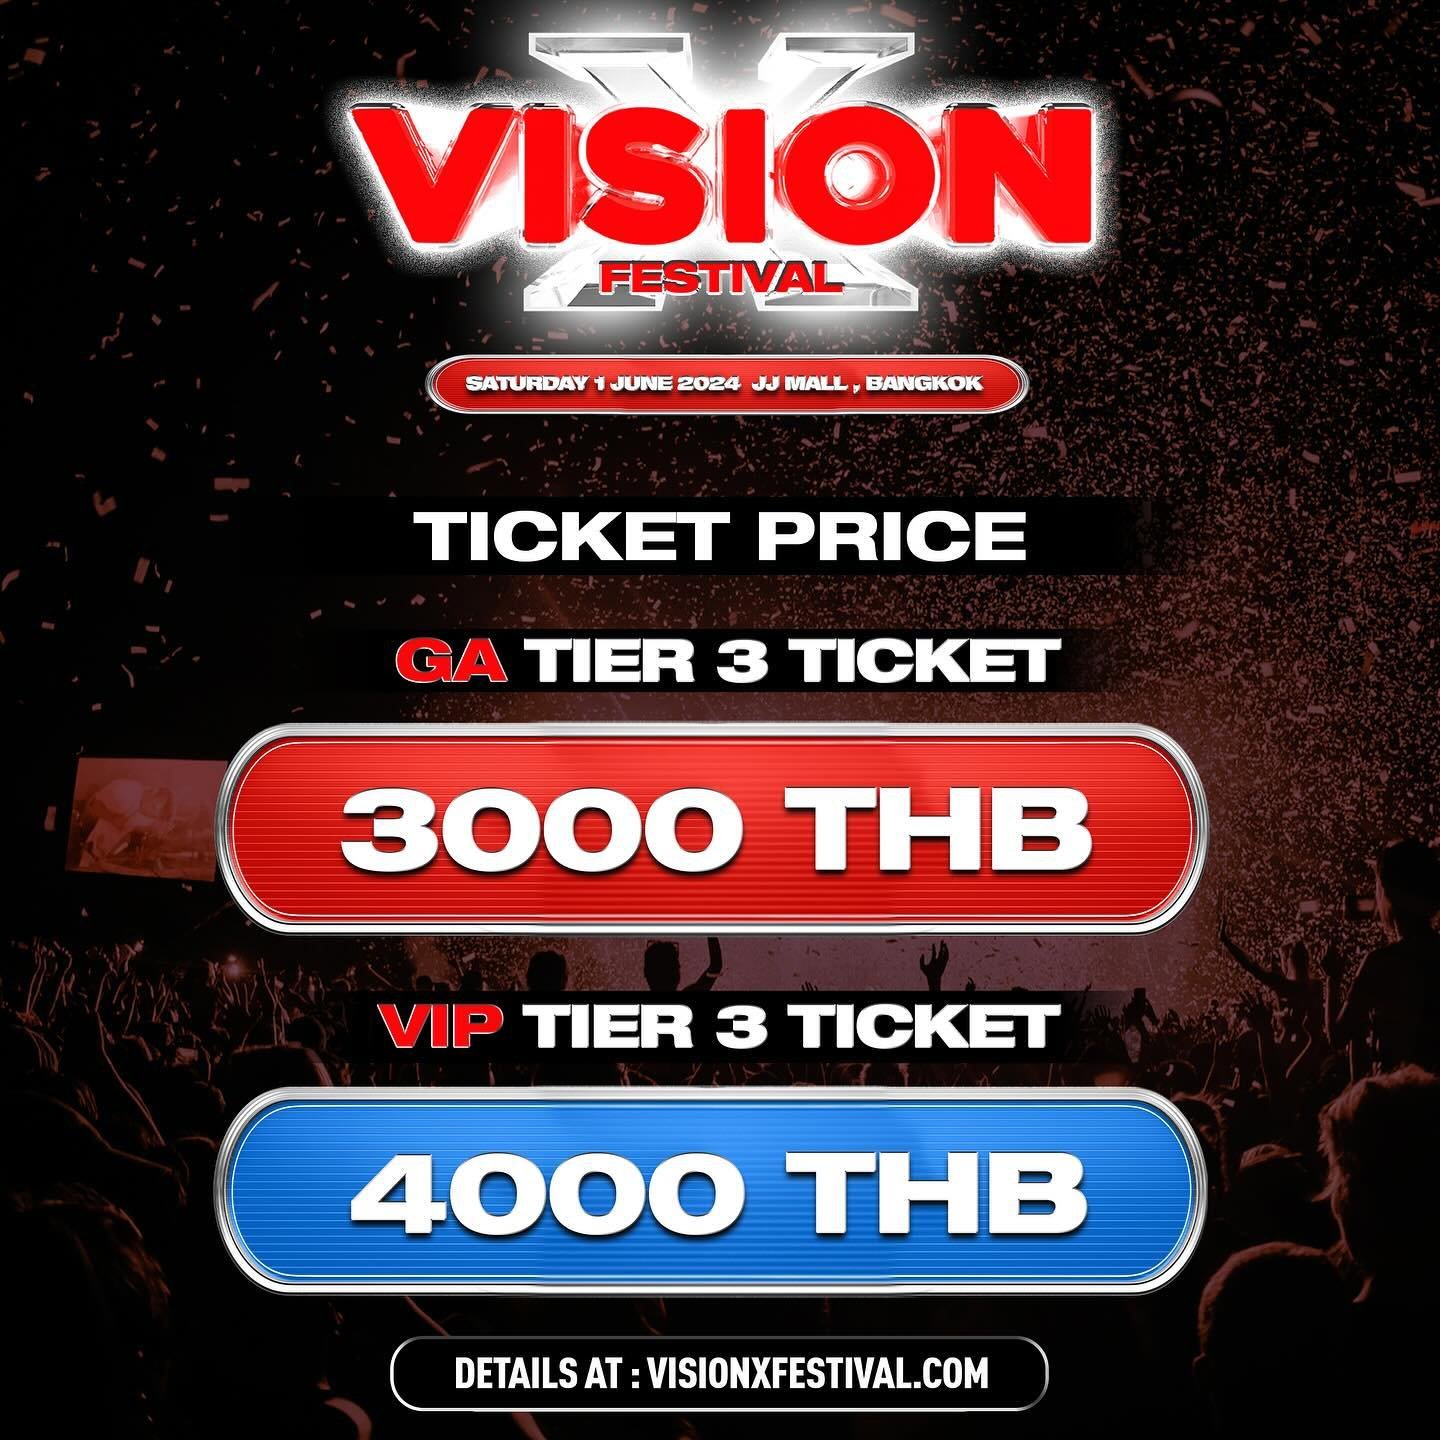 DON&rsquo;T MISS OUT YOUR TICKETS 🔥‼️
อย่าพลาดกดบัตรกันน้า 🫣❌

Get tickets now 👉🏼 visionxfestival.com
DATE - 1 JUNE 2024 📆
VENUE - JJ HALL, JJ MALL, BANGKOK 📍

#visionx #visionxfestival